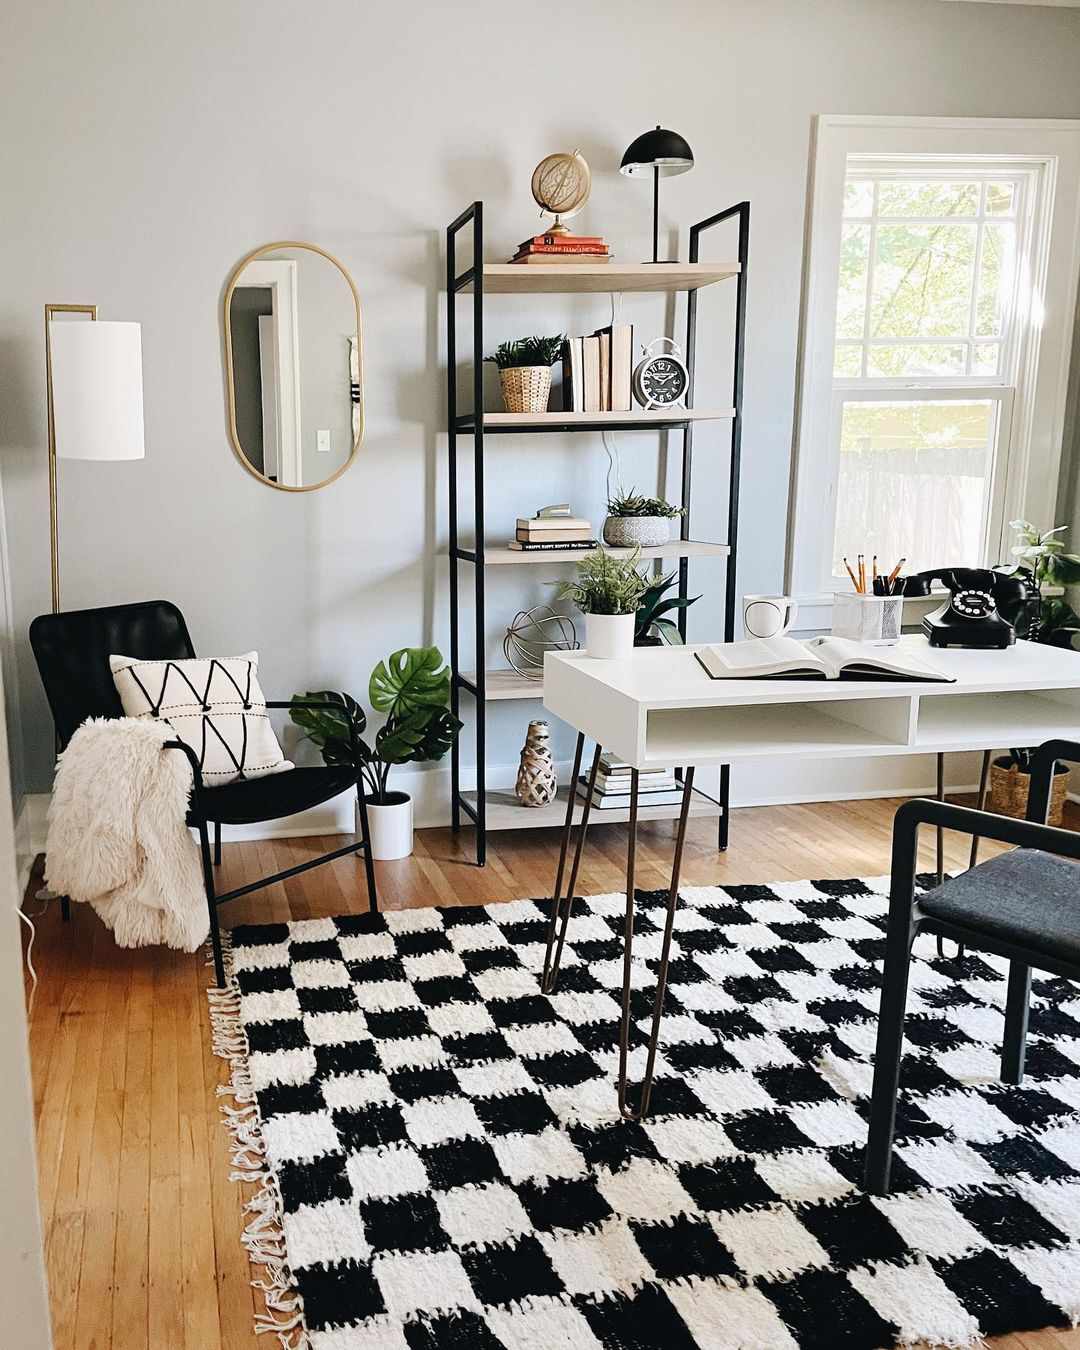 Checkered Rugs: Bringing a Sense of Order to Your Home Office缩略图